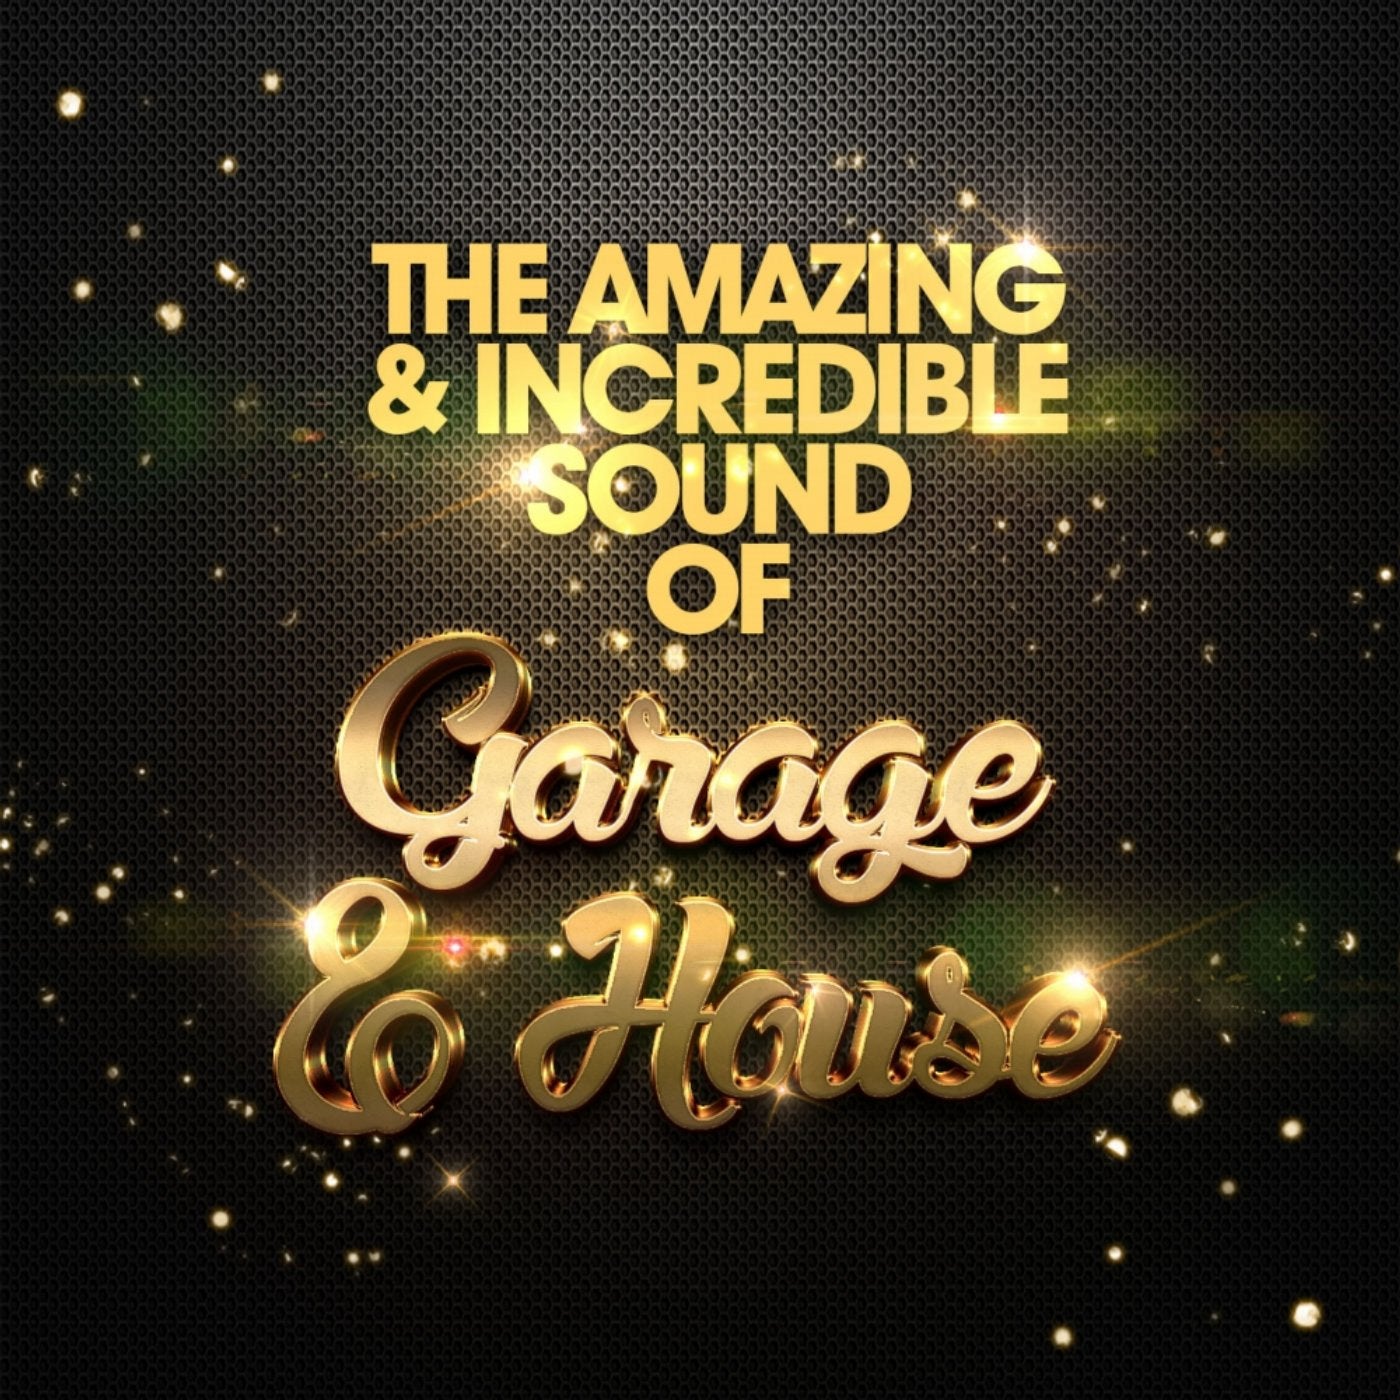 The Amazing & Incredible Sound of Garage, & House